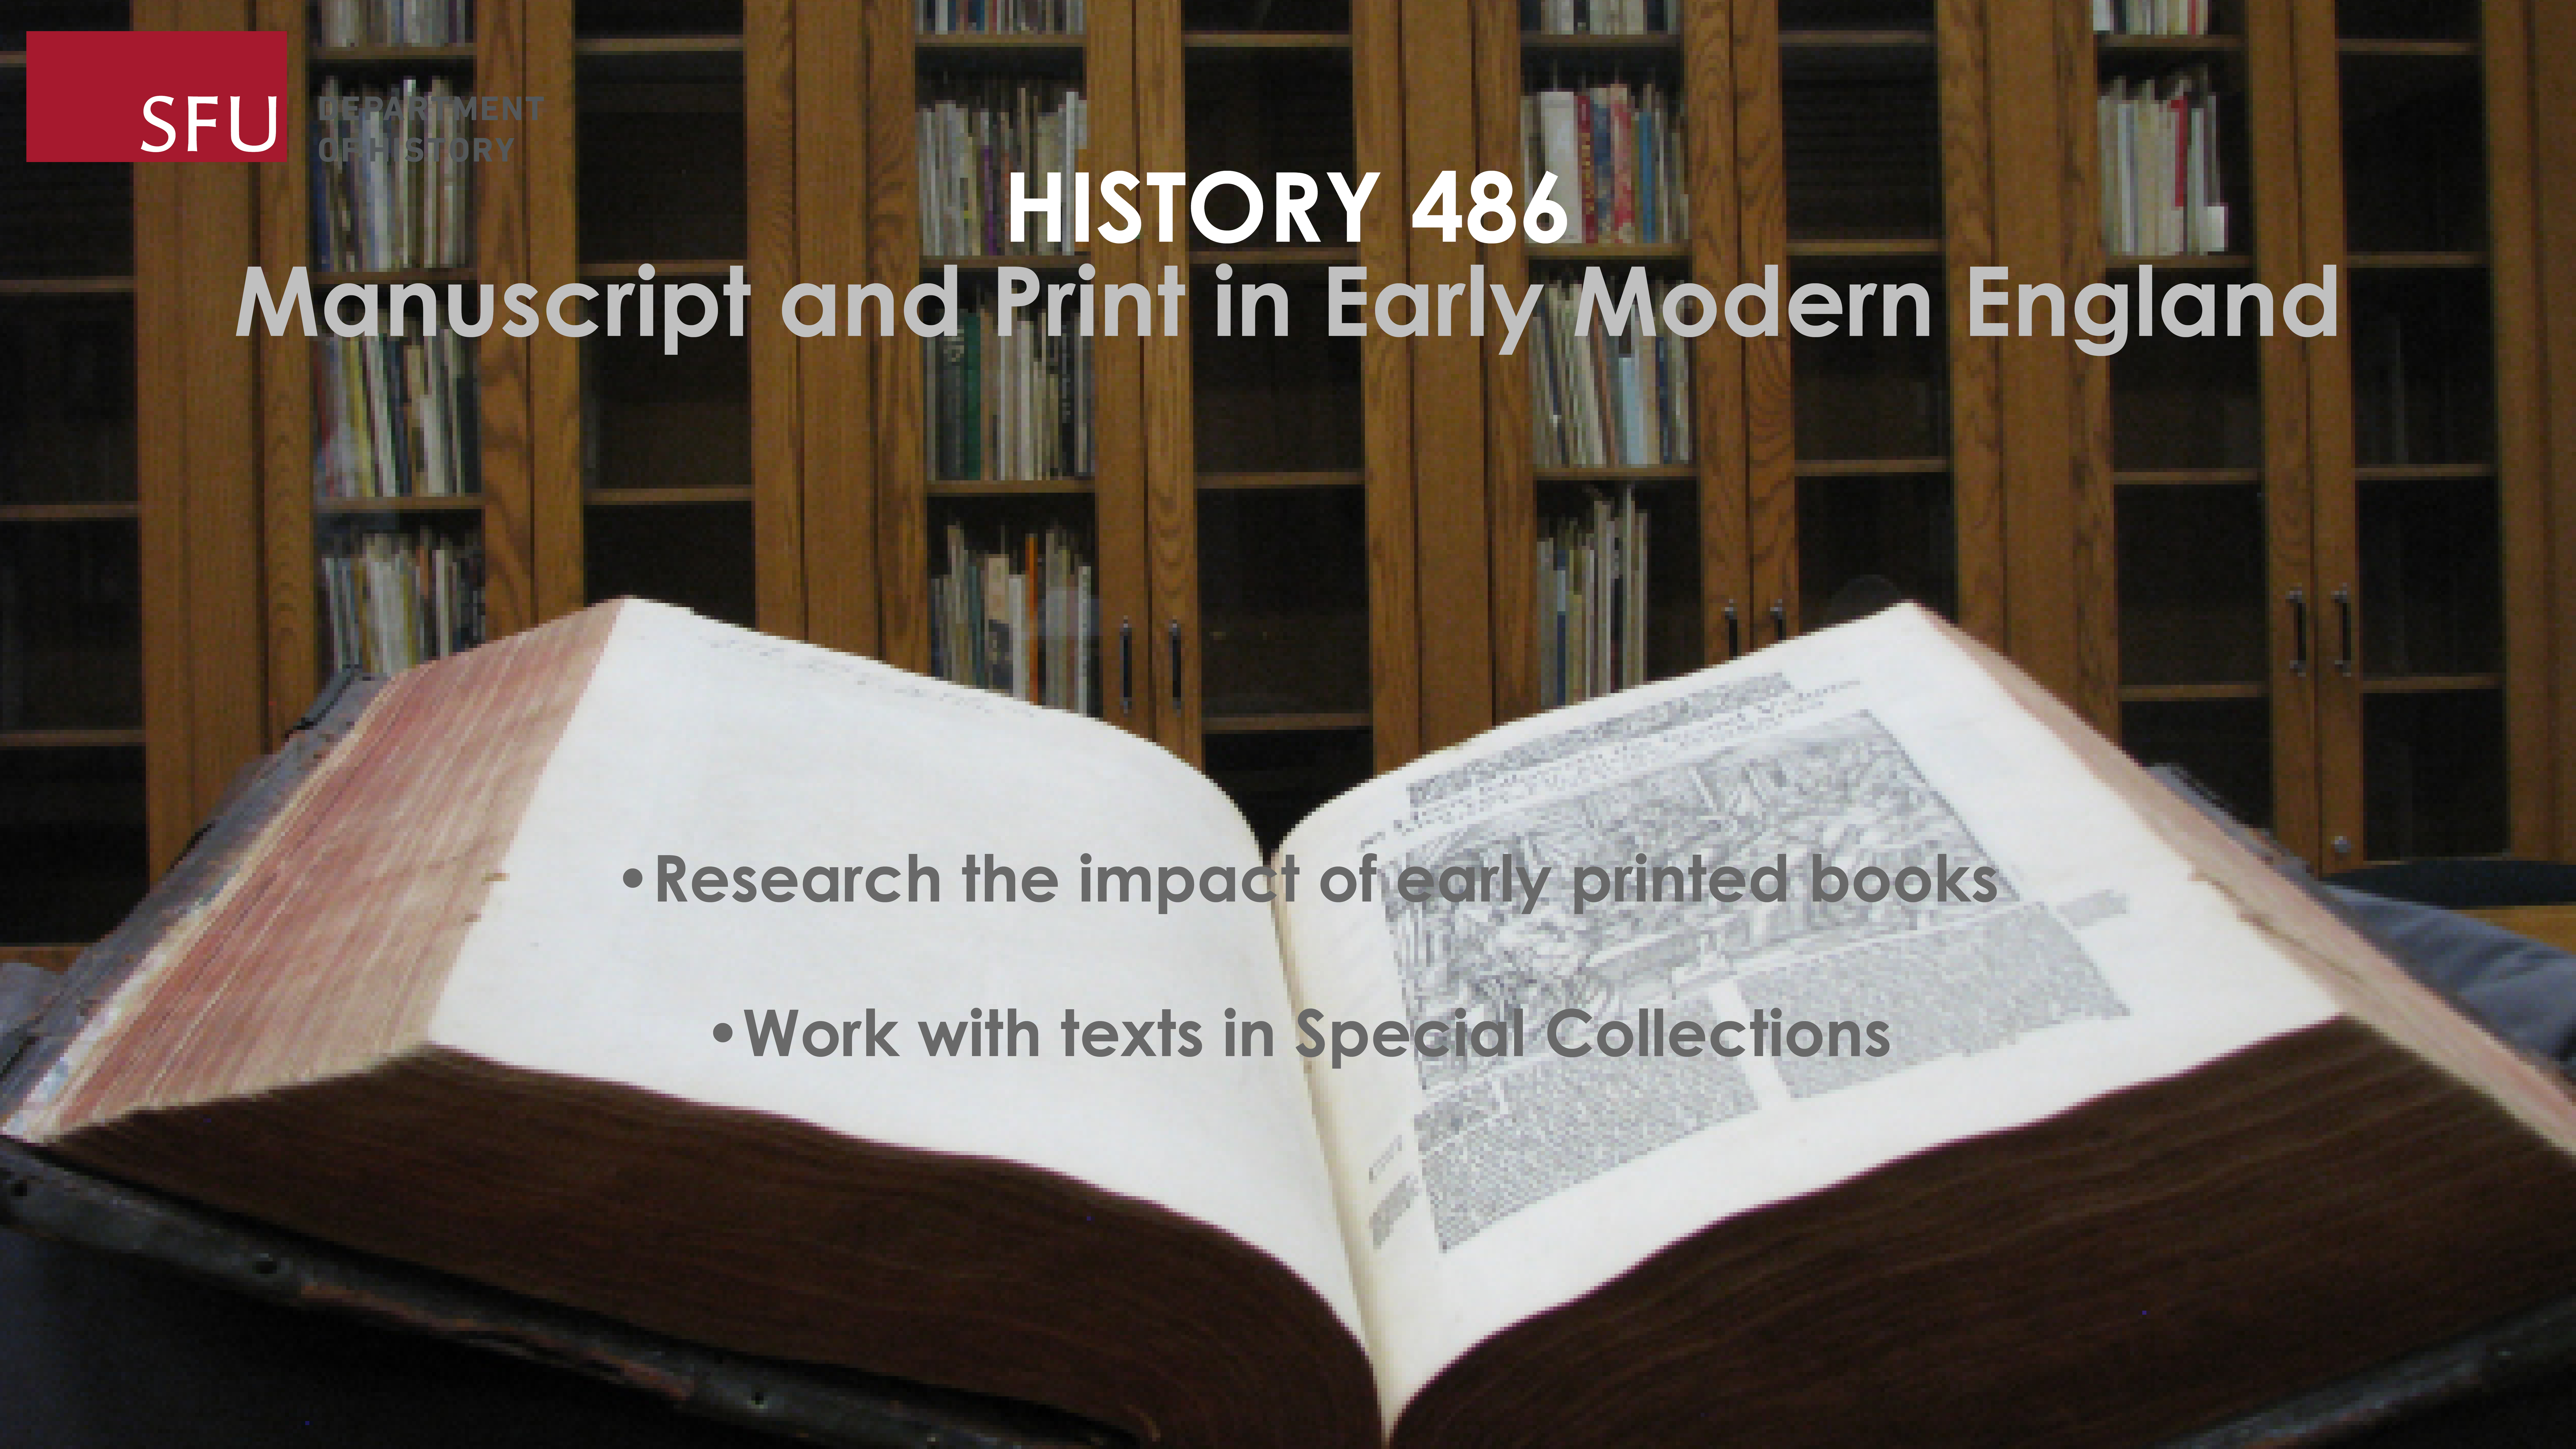 HIST 486 Manuscript and Print in Early Modern England